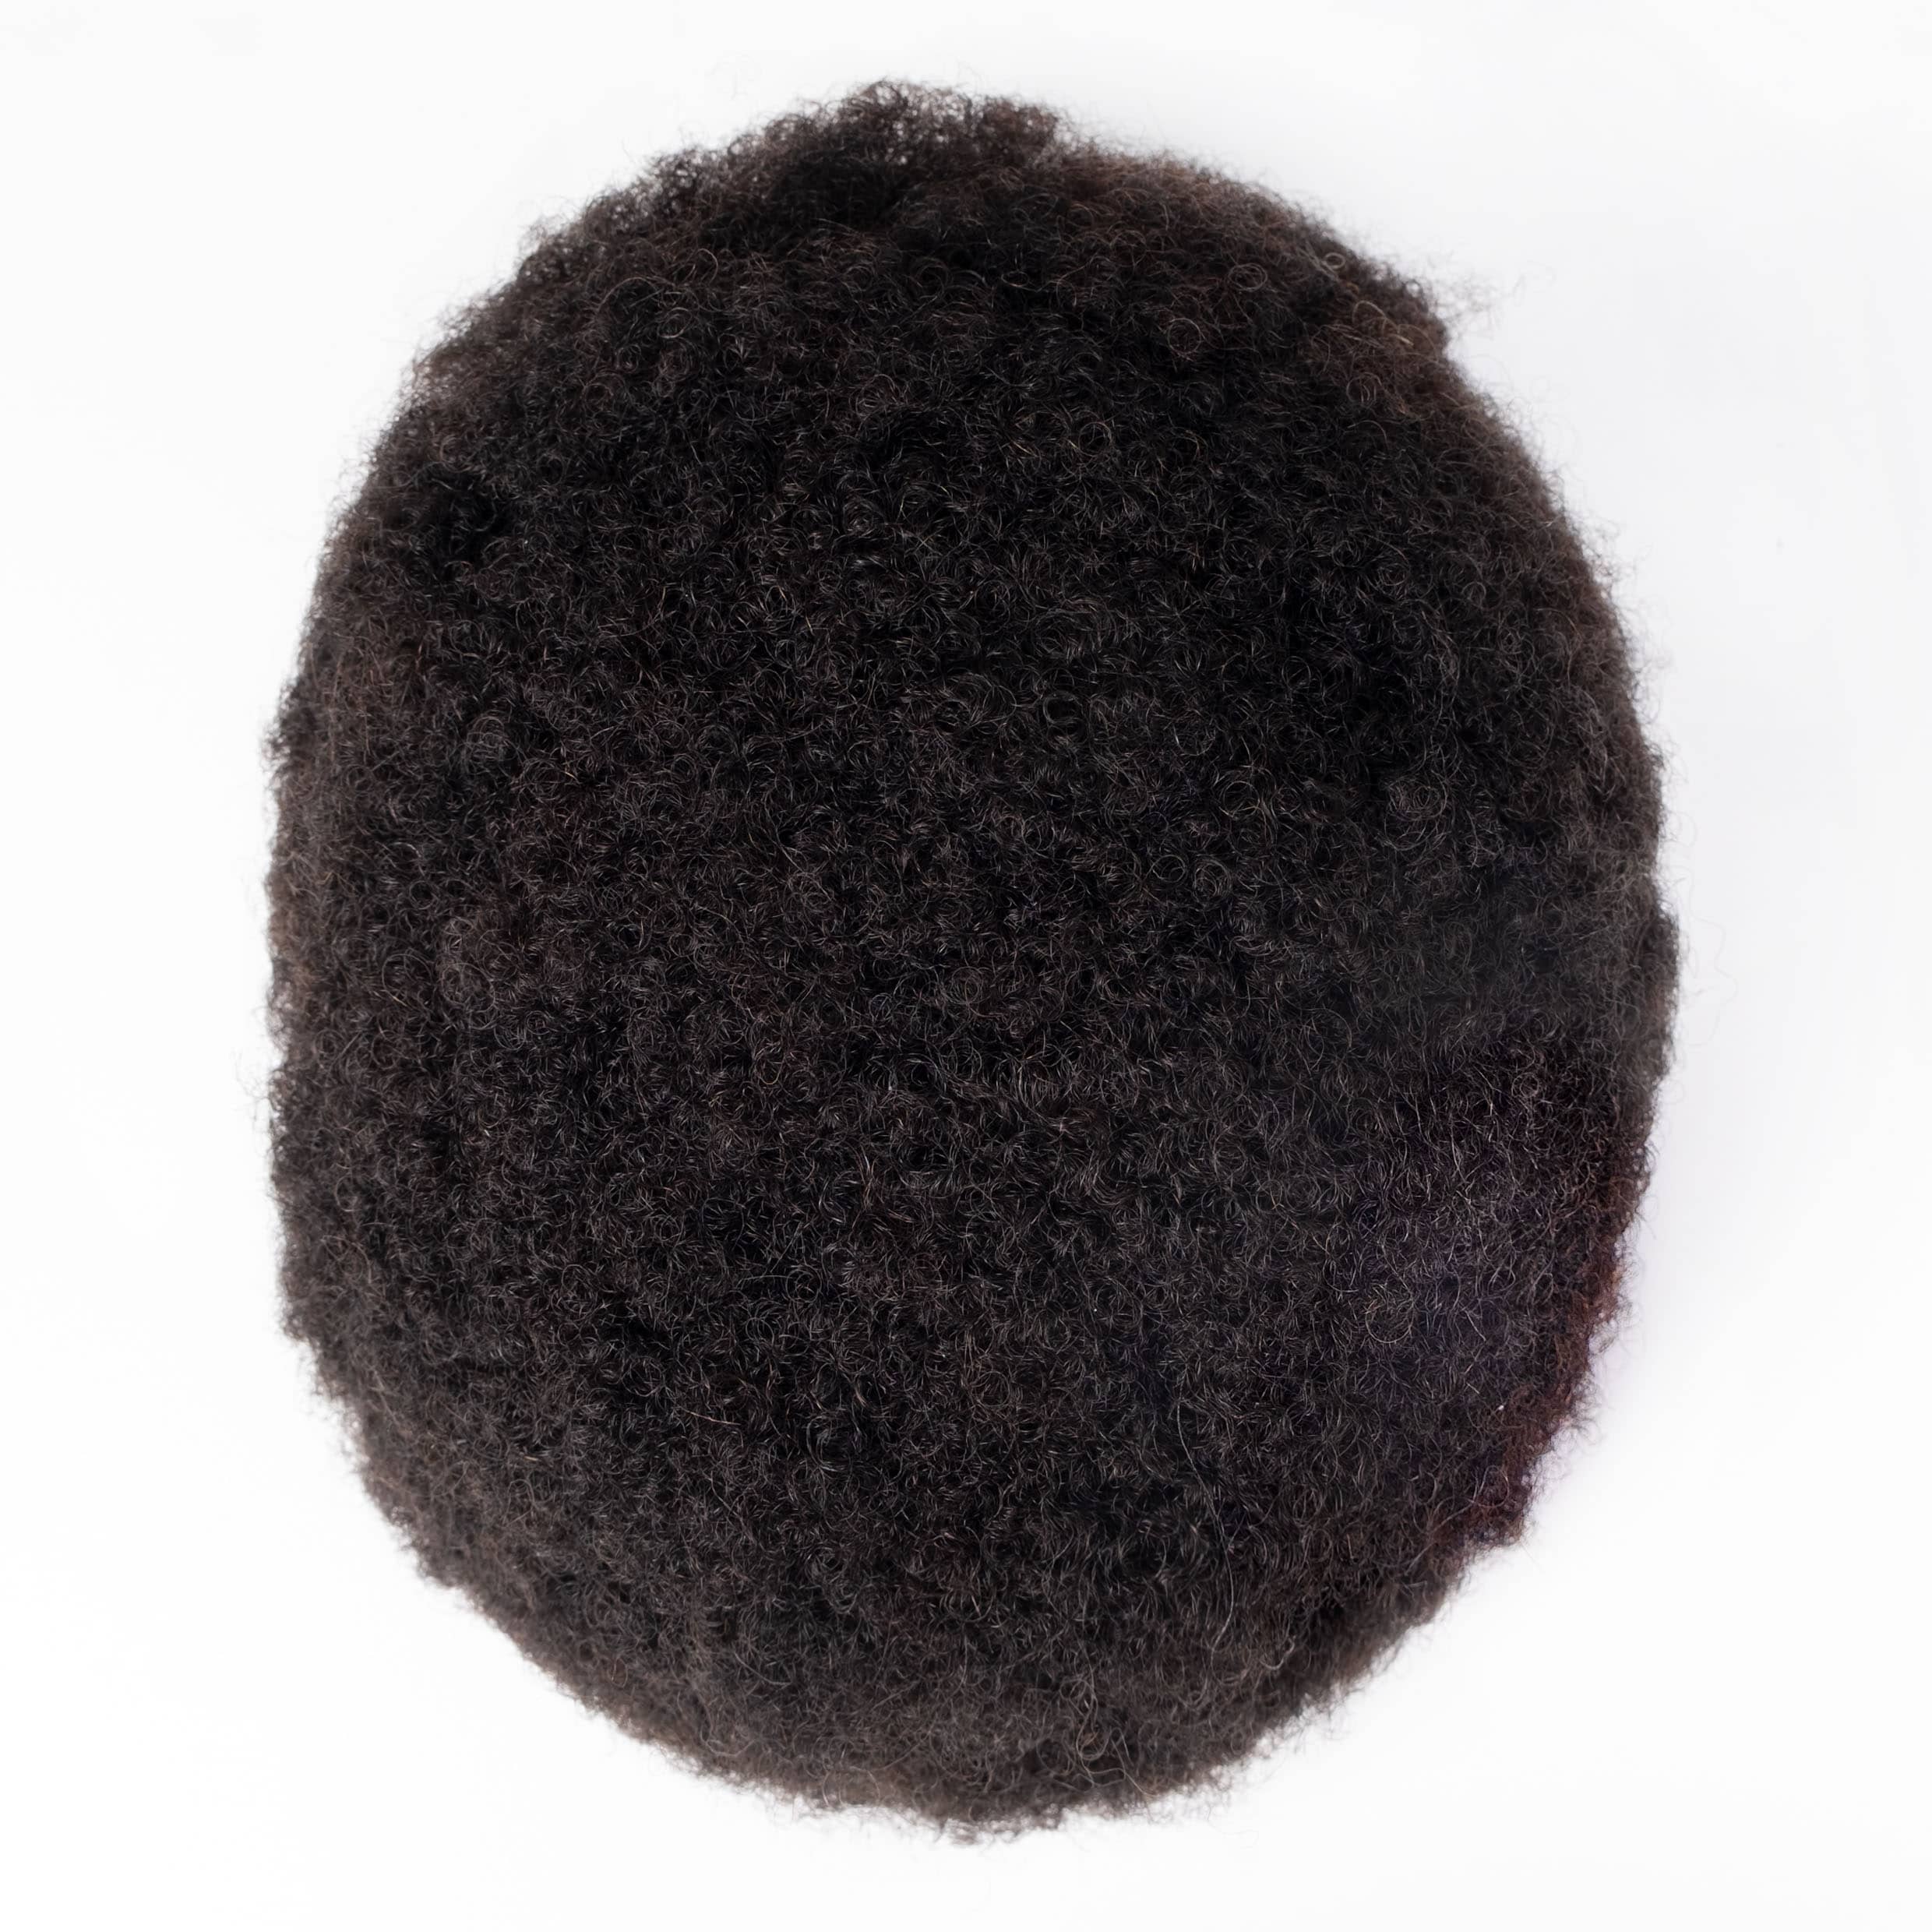 GEXWIGS African American Afro Men’s Hair System Full Lace